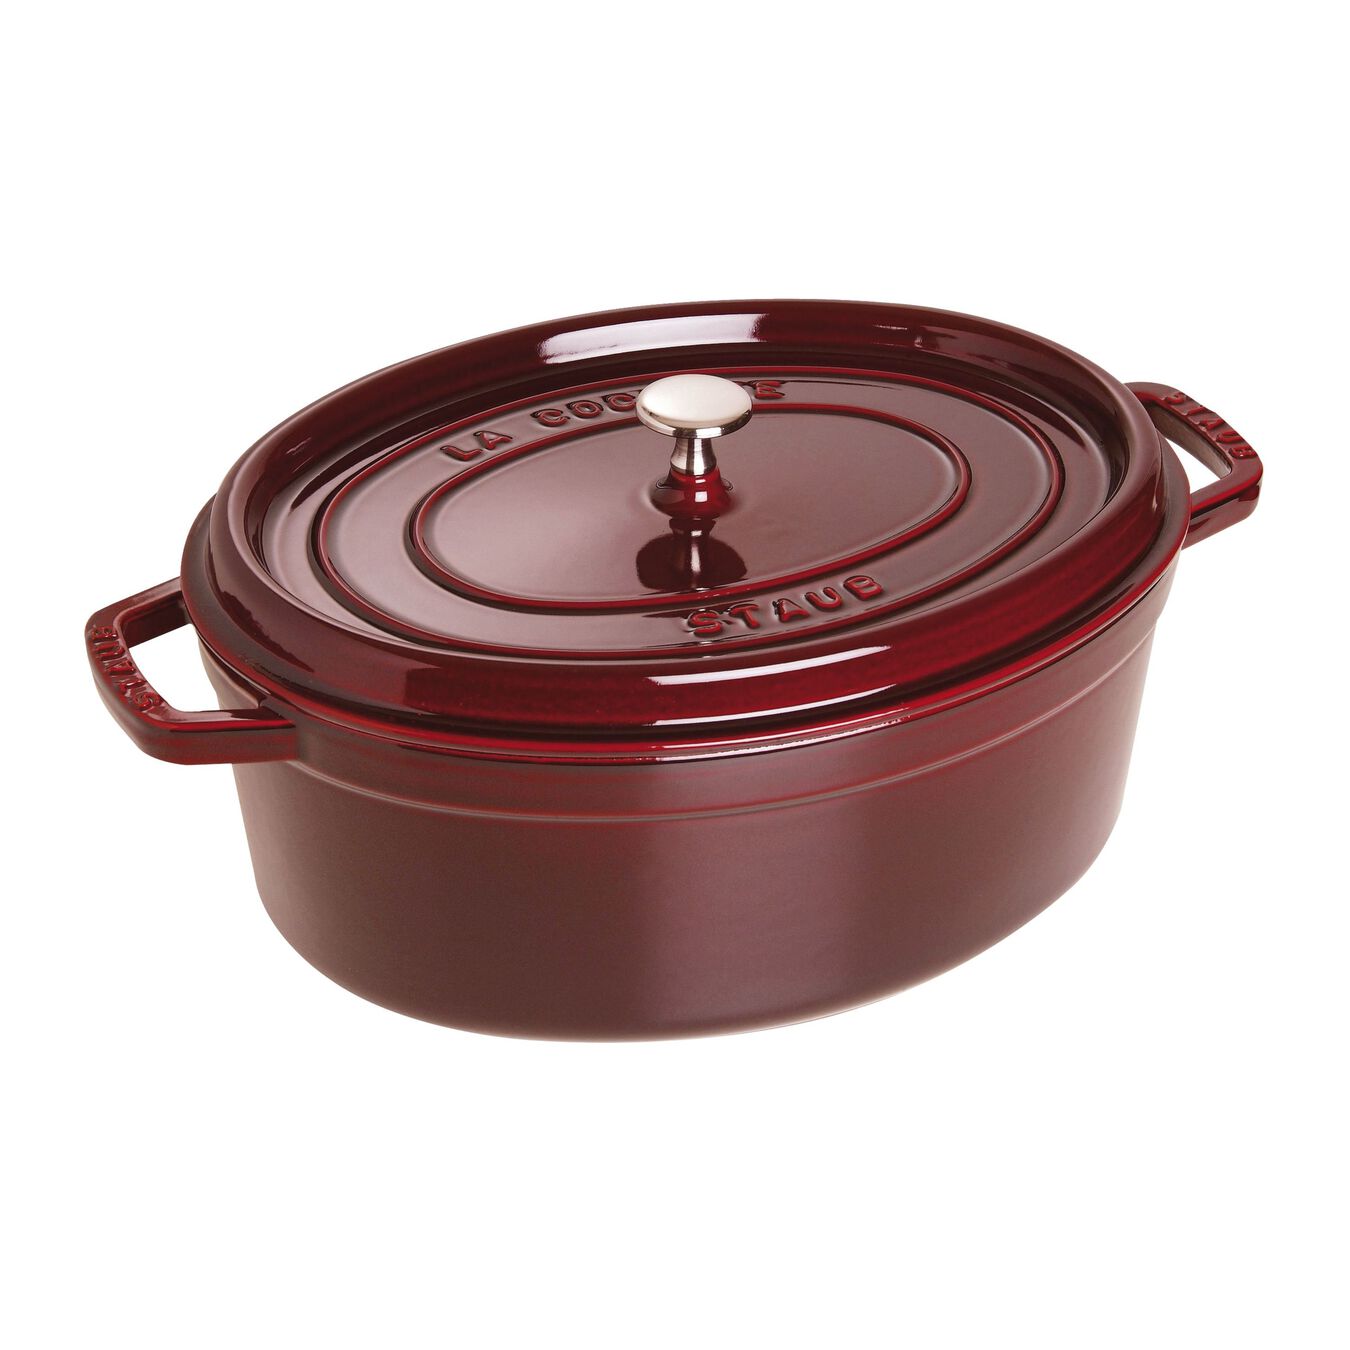 33 cm oval Cast iron Cocotte grenadine-red,,large 1